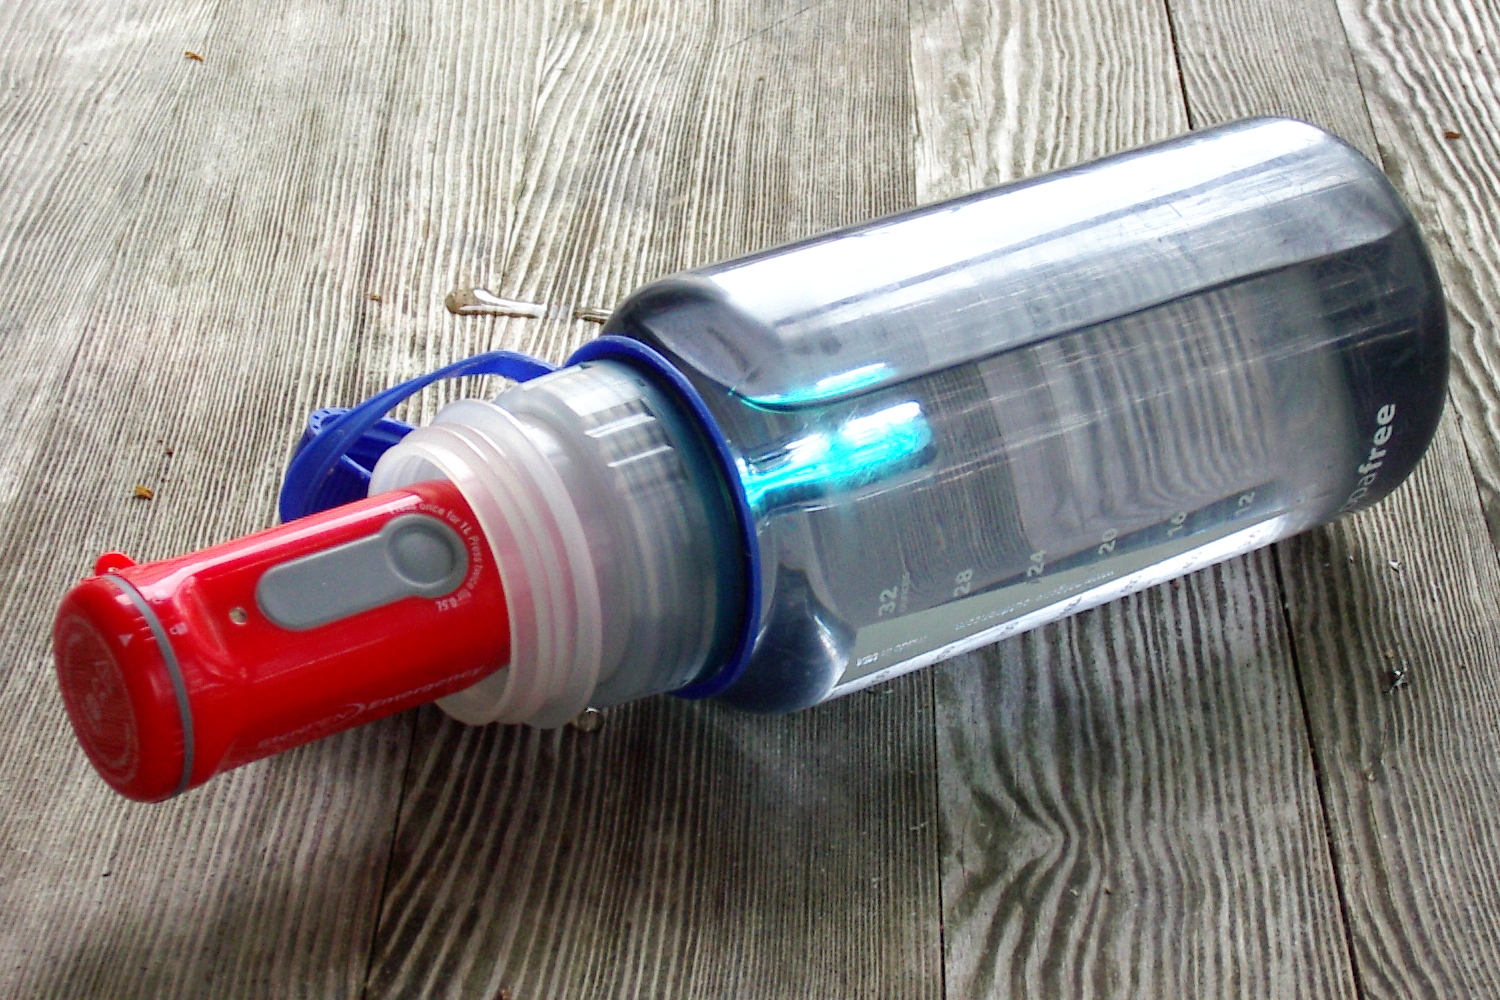 Operating Principles of a Portable Water Purifier